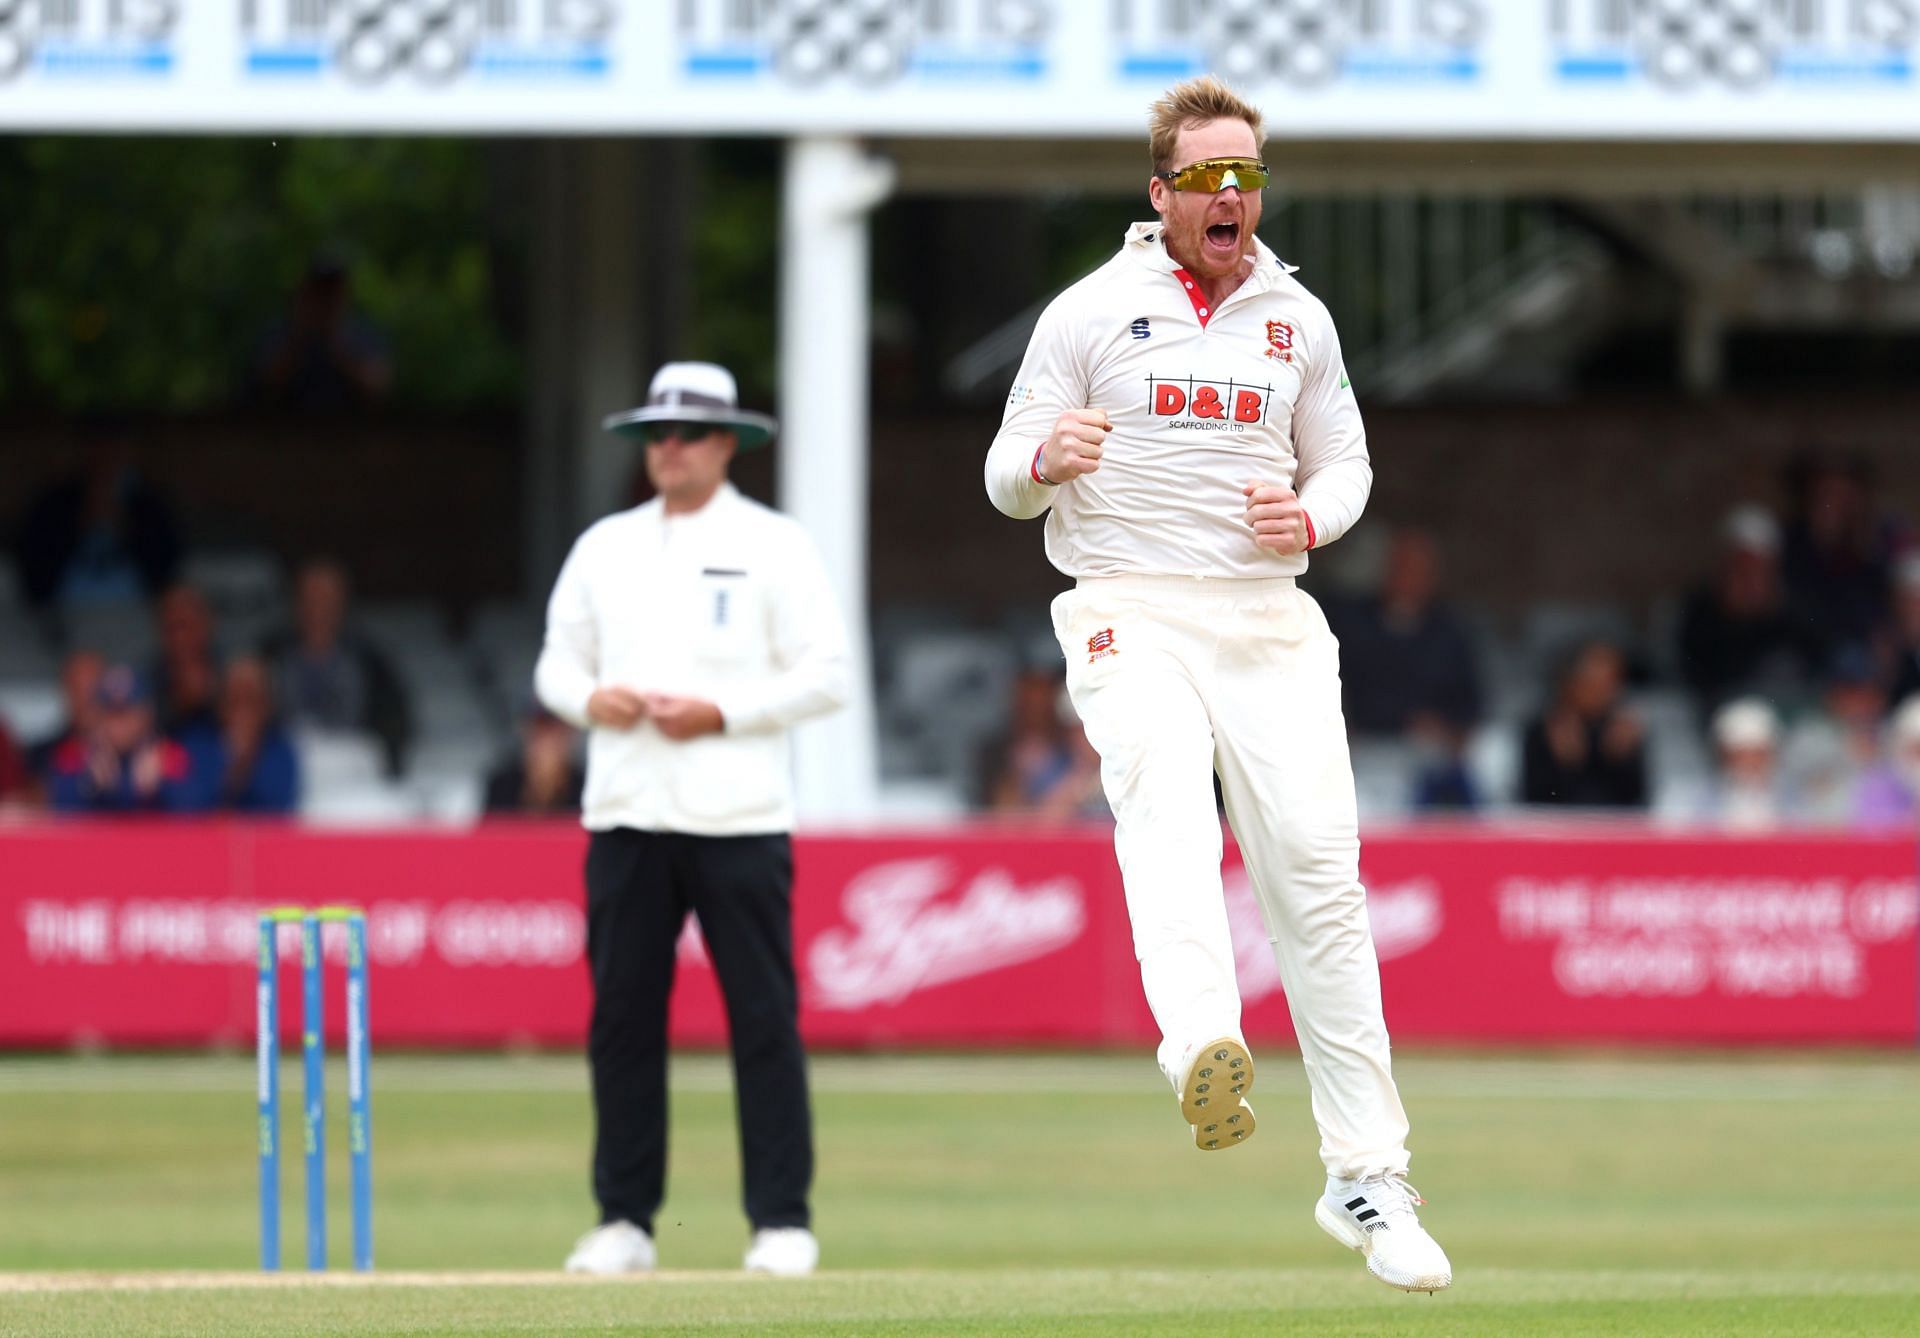 Simon Harmer has plenty of red ball experience in England. (Credits: Getty)